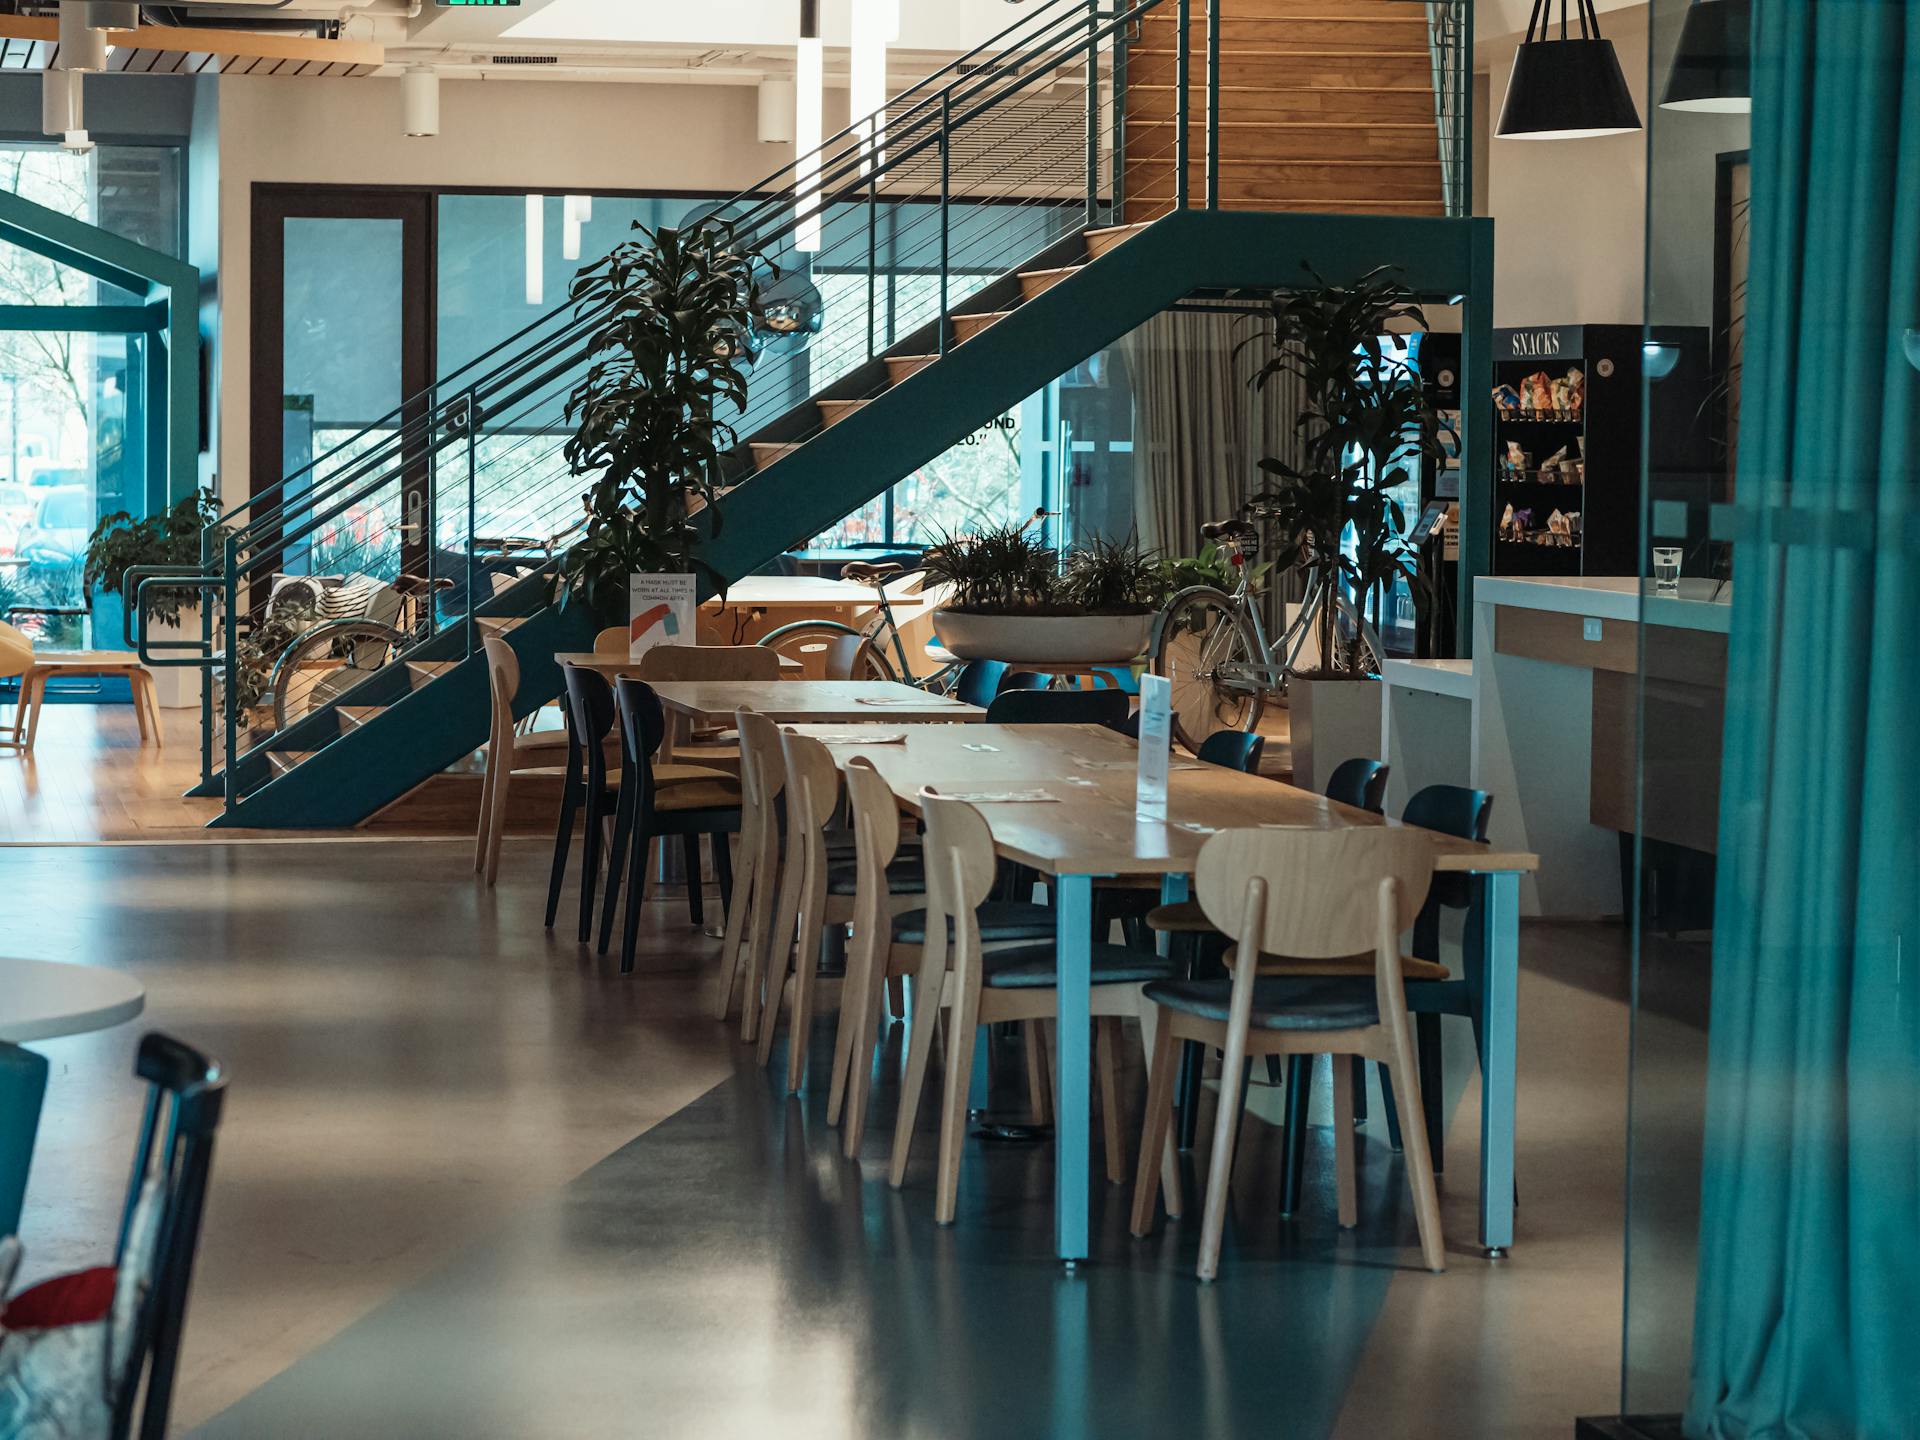 Tables and chairs in a cafeteria | Source: Pexels